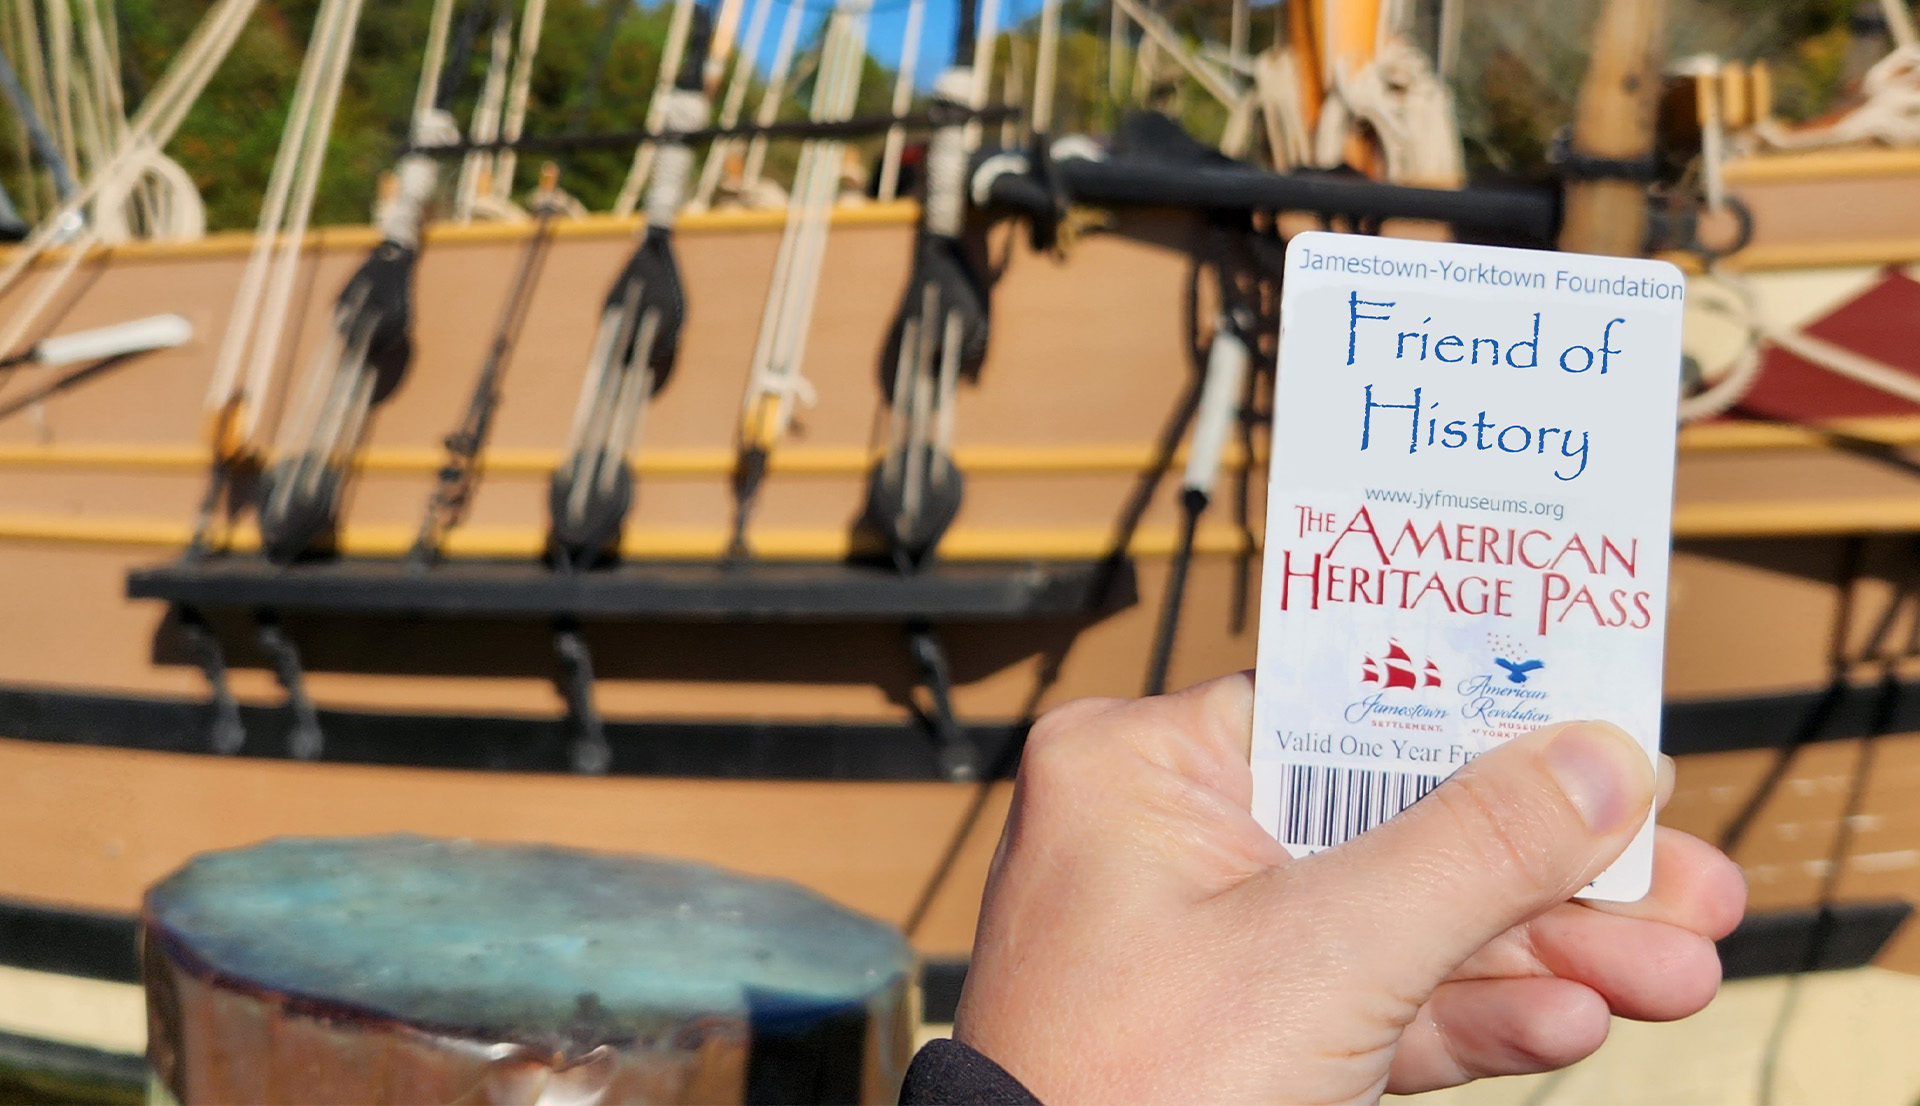 An annual pass card being held in front of a ship